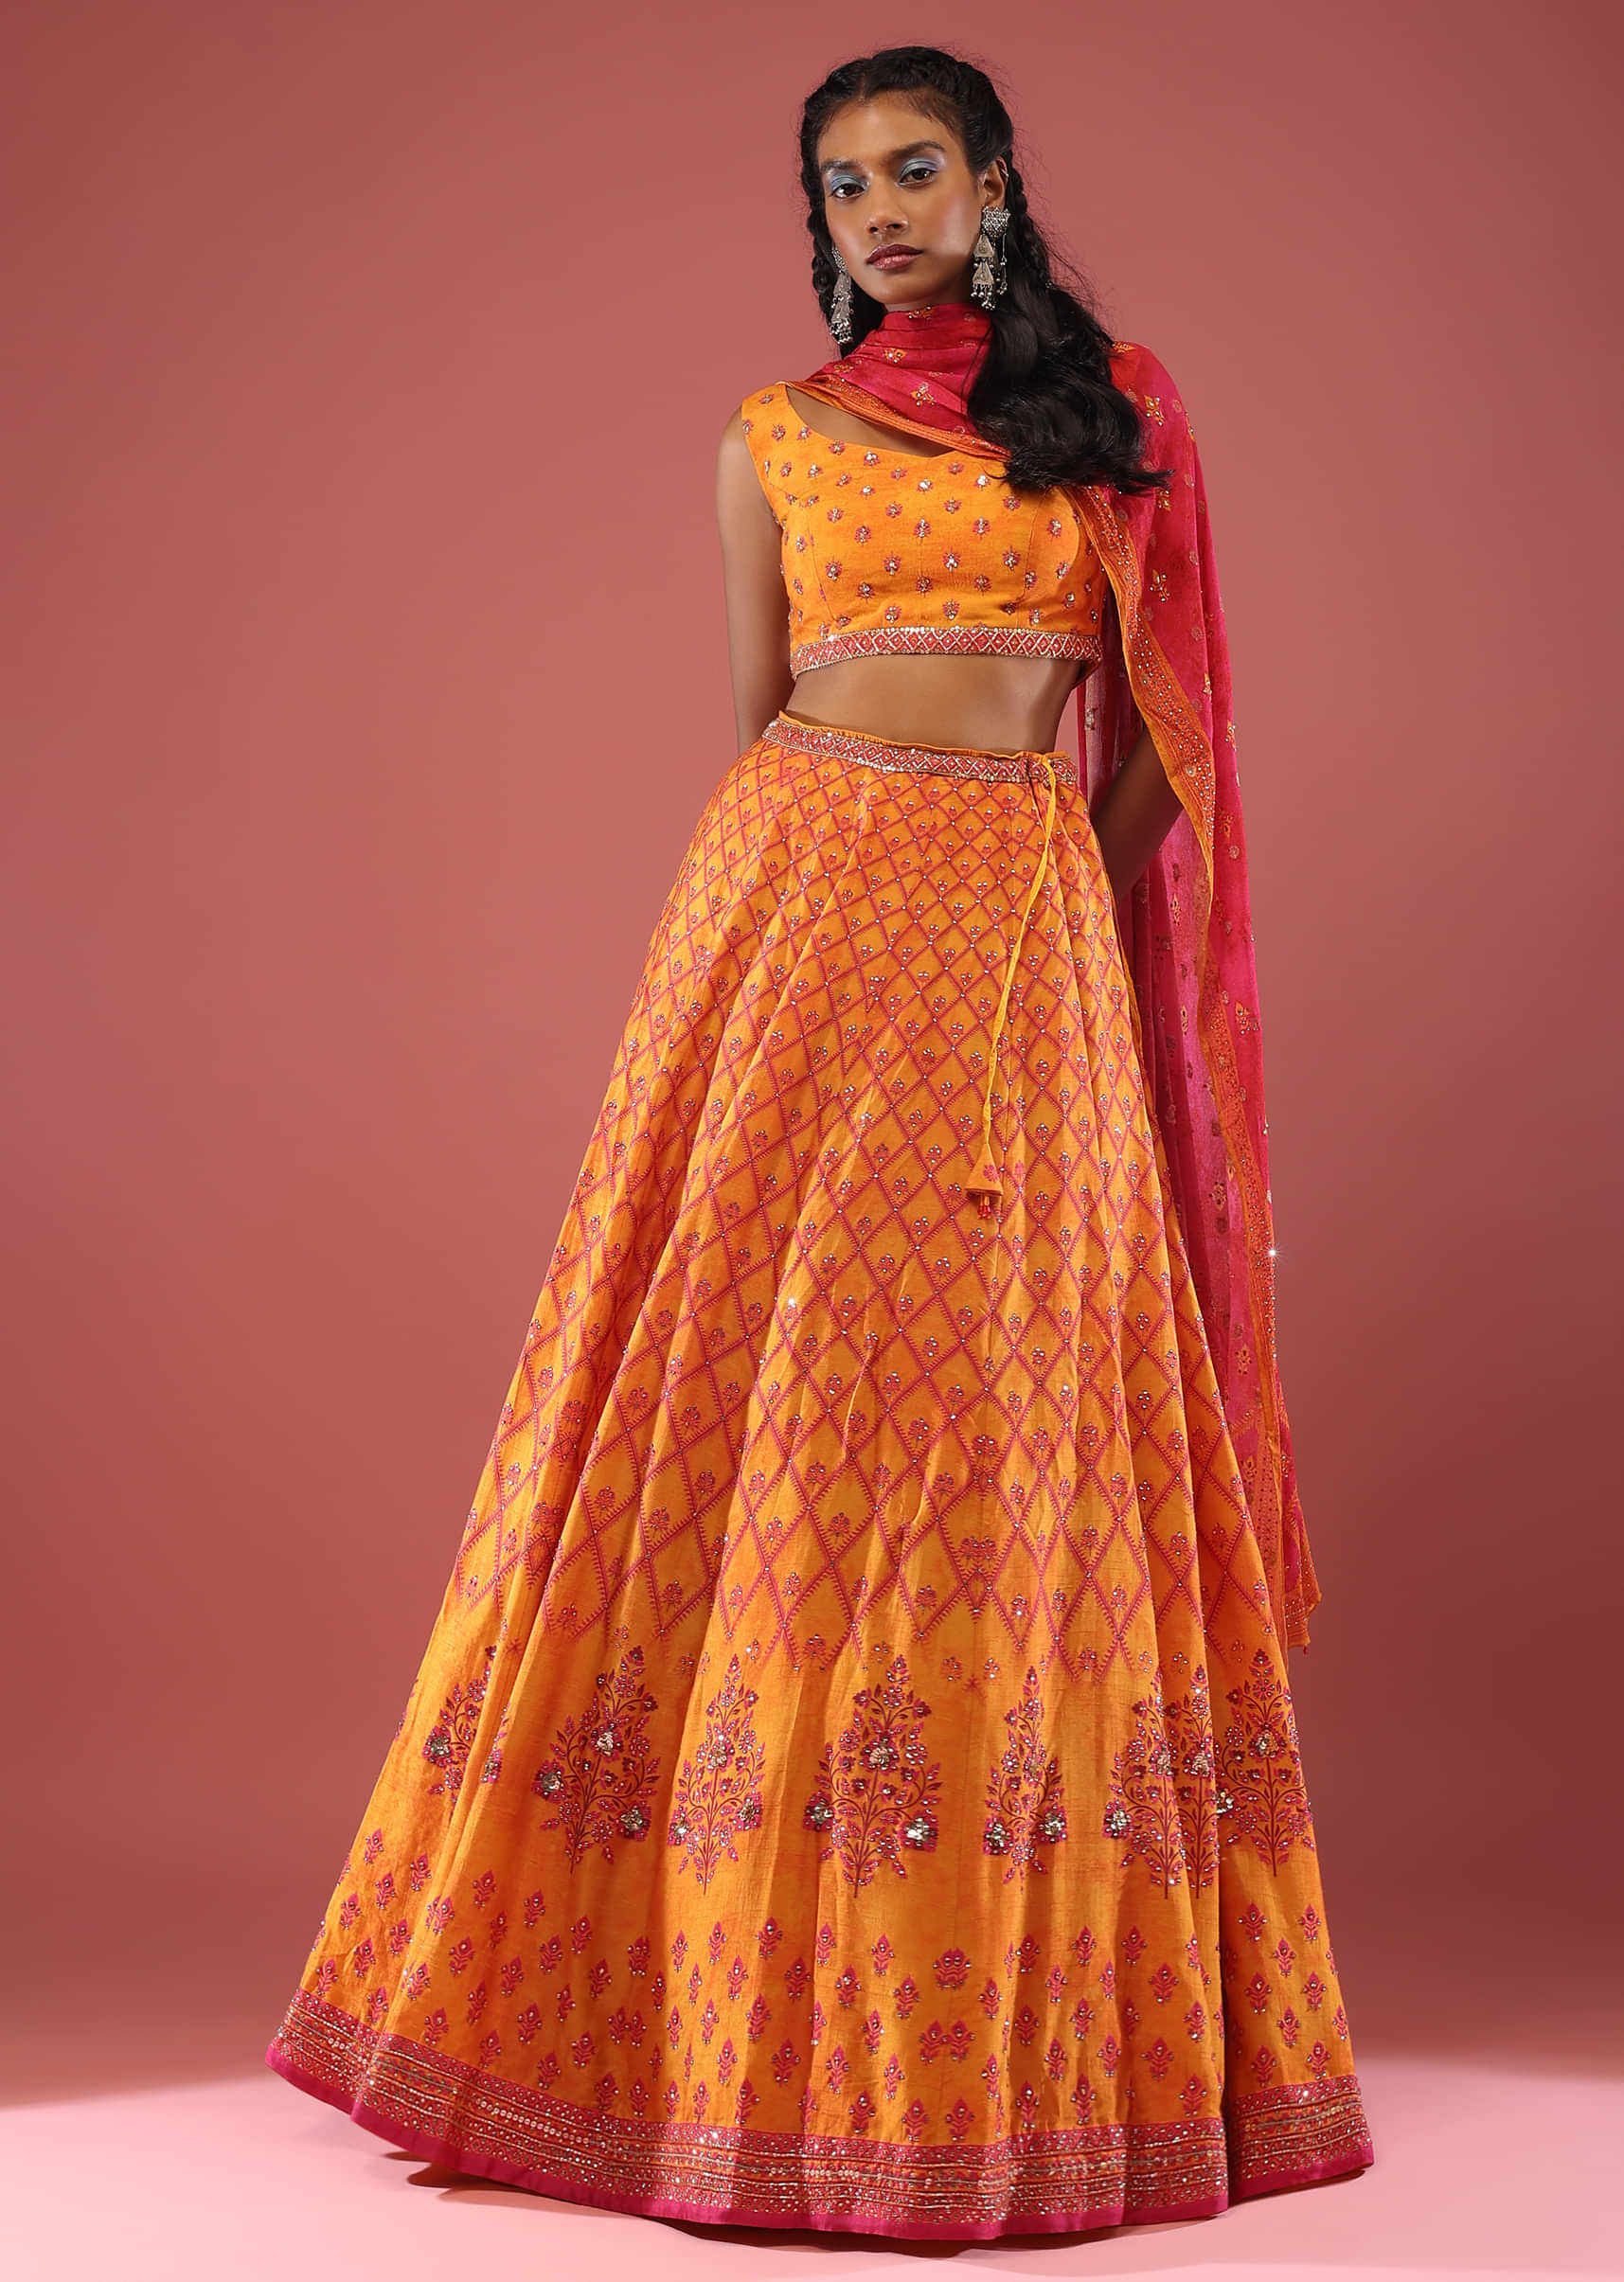 Yellow Silk Lehenga And Blouse With A Geometric Mesh Print Embellished With Stones And A Pink Chiffon Dupatta